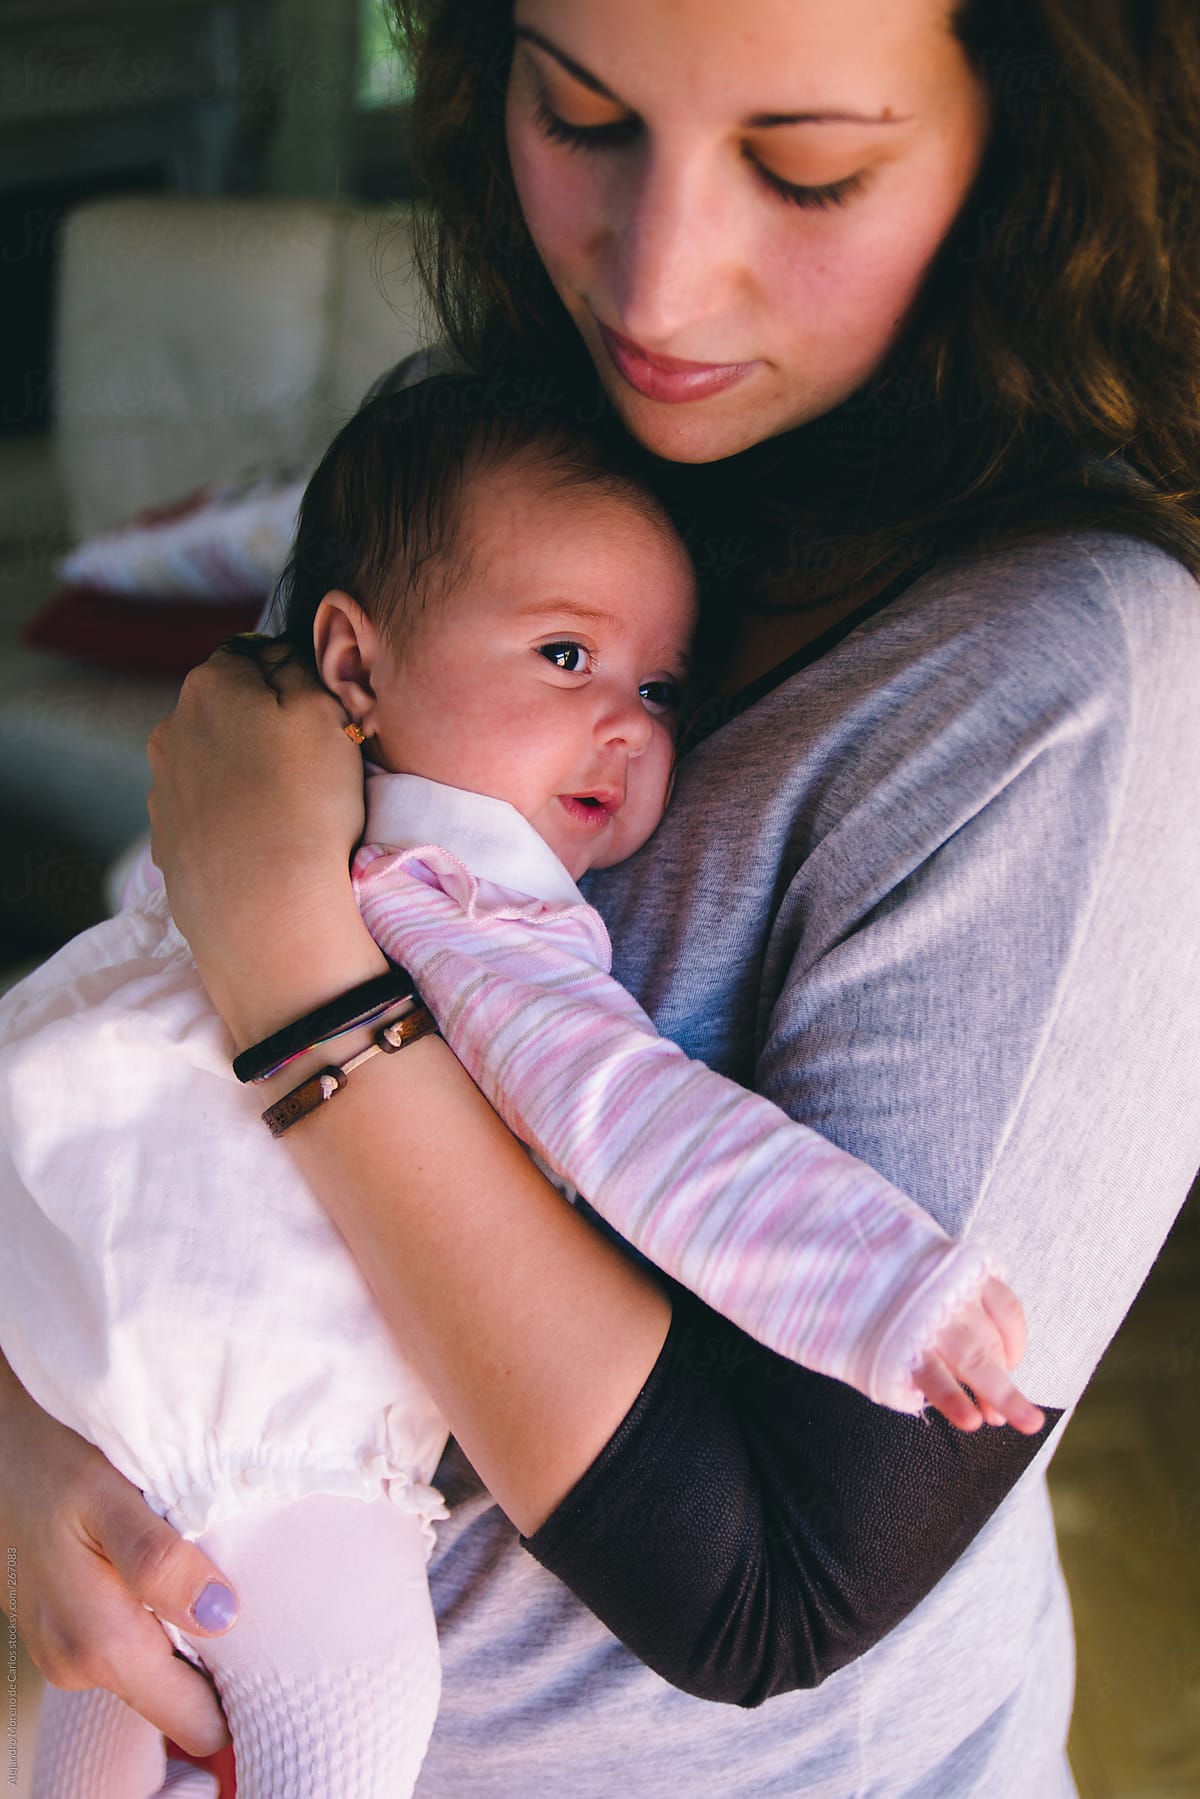 Babe Mother With Her Baby Babe On Her Arms By Stocksy Contributor Alejandro Moreno De